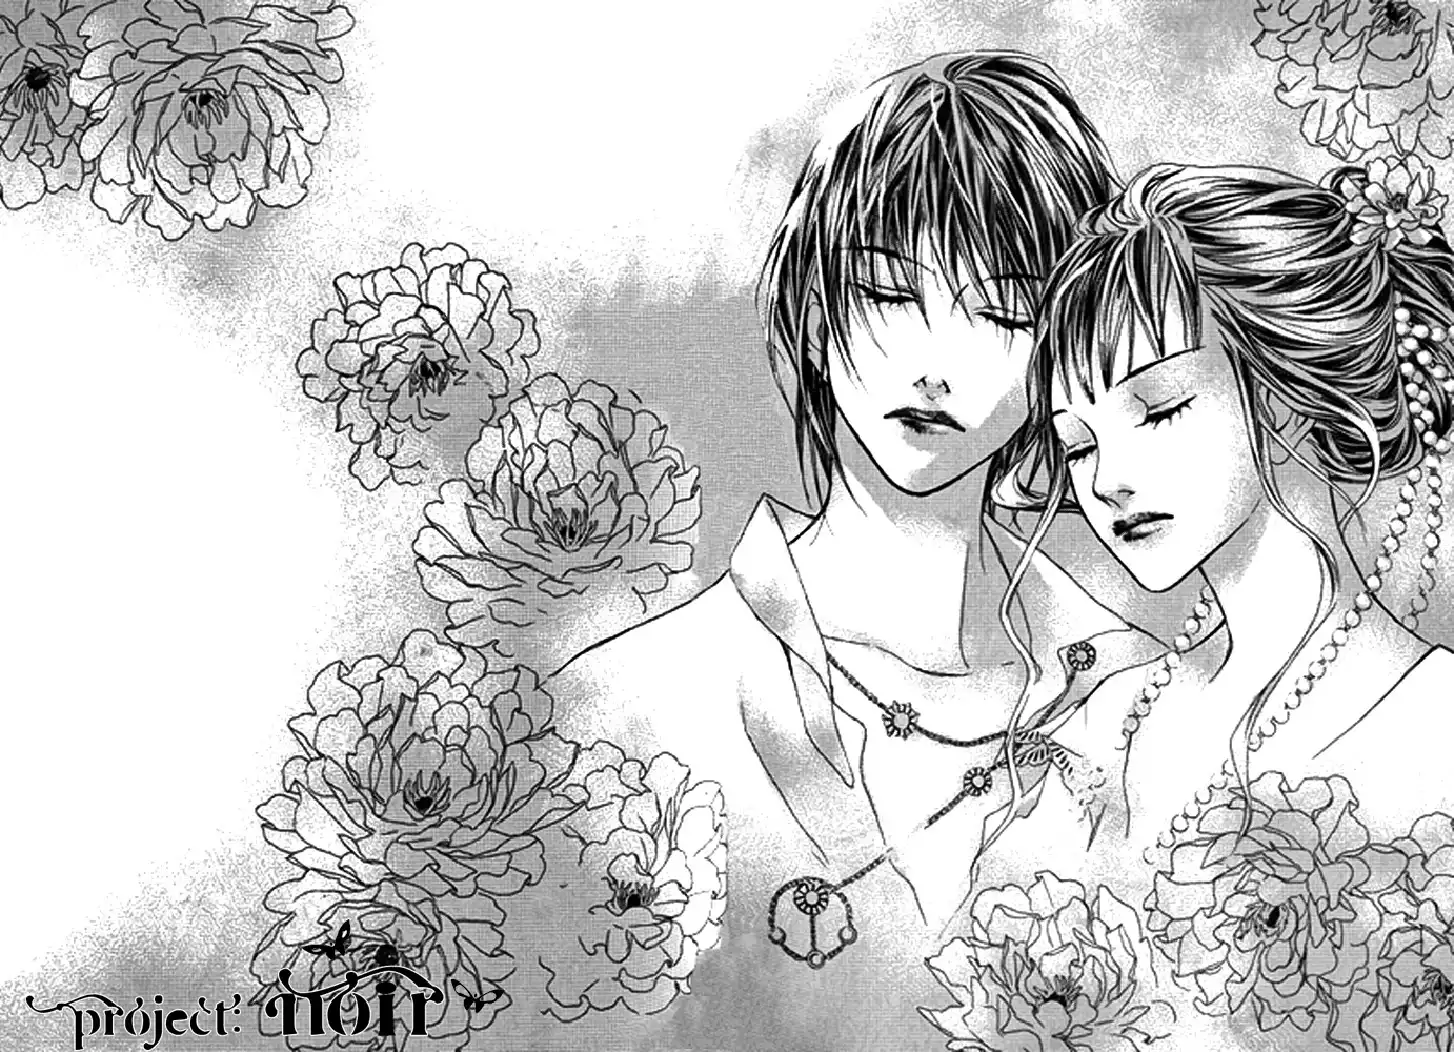 Flowers of Evil (Manhwa) Chapter 26